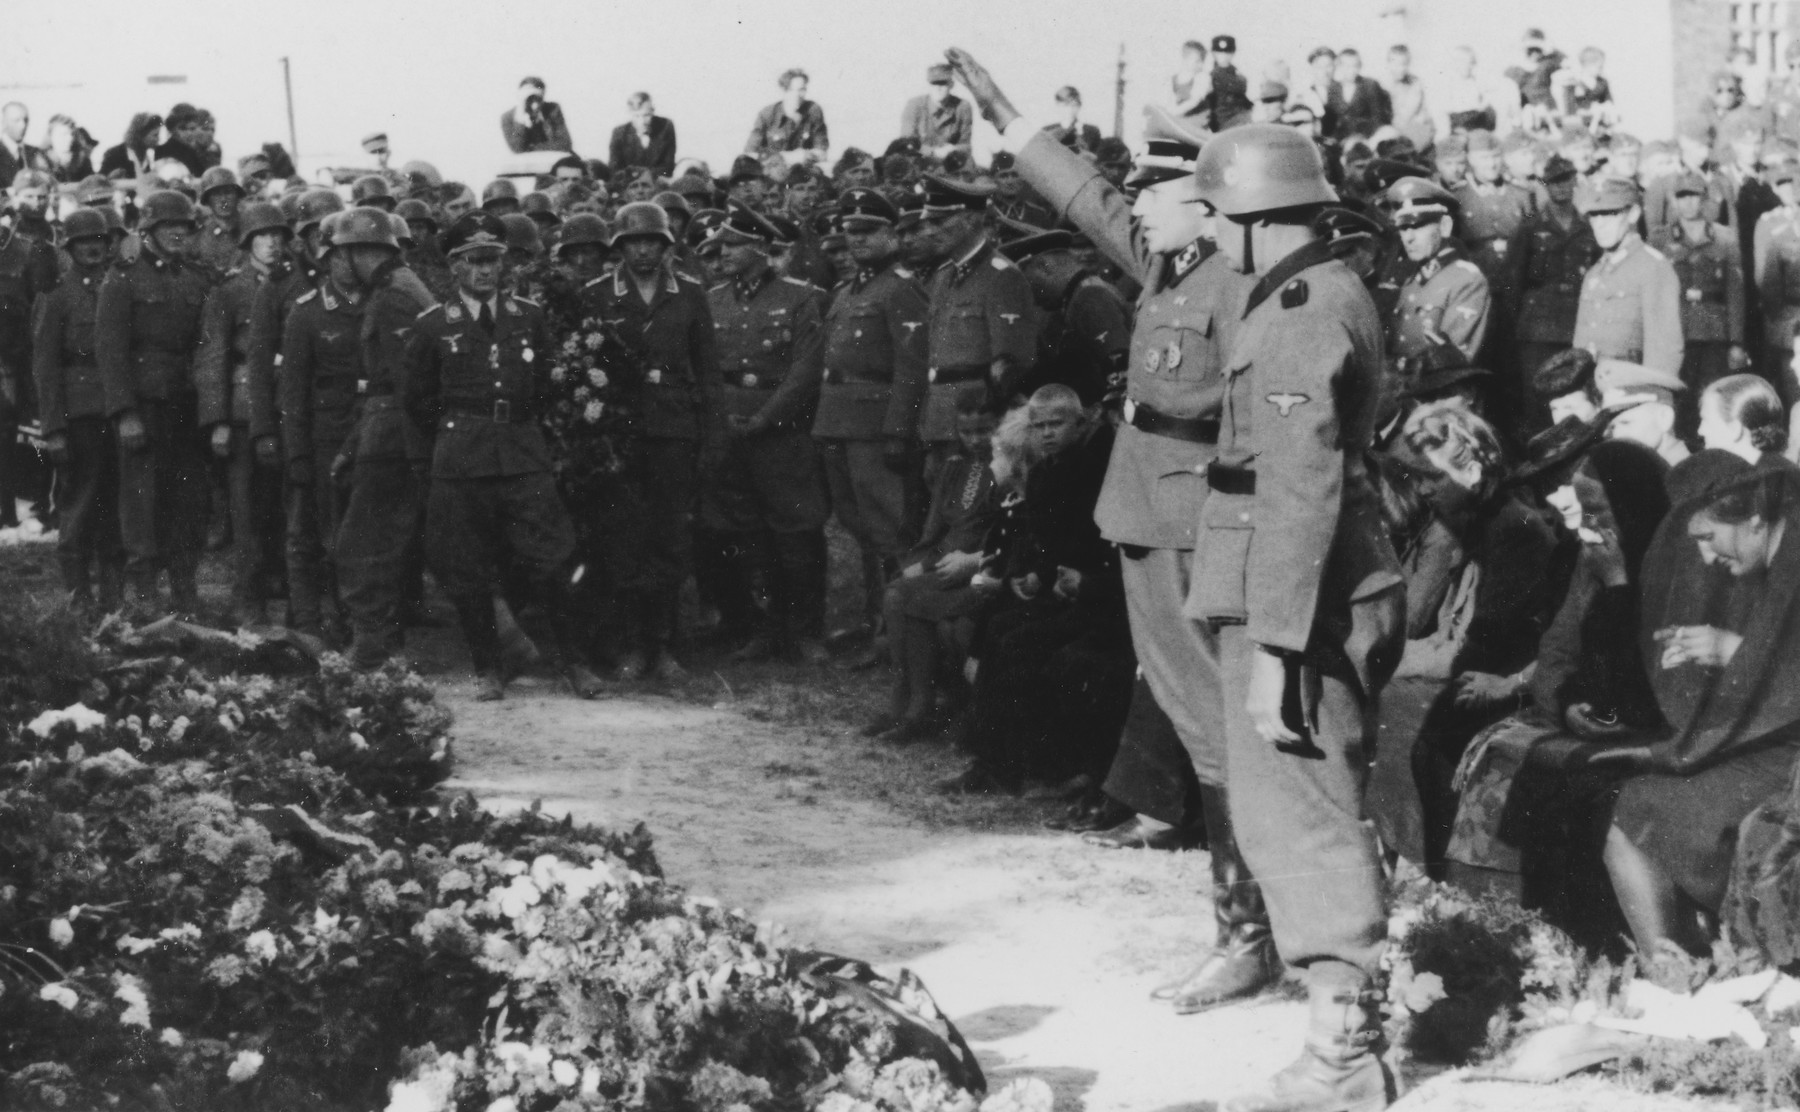 SS officer, Karl Hoecker salutes in front of an array of wreaths during a military funeral near Auschwitz.

The original caption reads "Beisetzung von SS Kameraden nach einem Terrorangriff."  (Burying our SS comrades from a terror attack.) 

This probably is the aftermath of the September 13th bombing of IG Farben in which 15 SS men died in the SS residential blocks and 28 were seriously wounded.

Pictured in the background are Josef Kramer and Karl Moeckel.